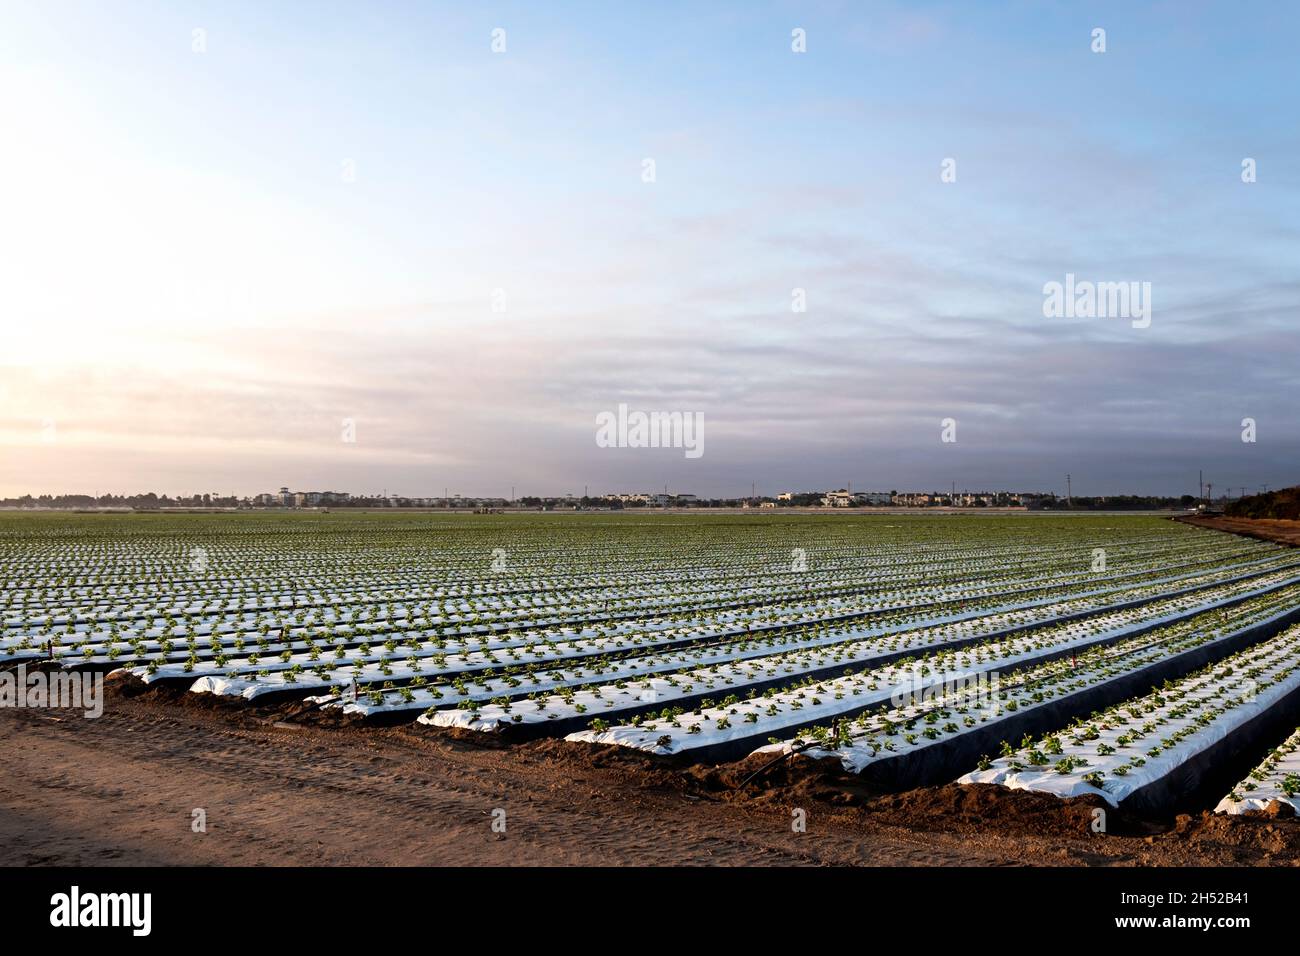 Field of a freshly planted crop of strawberries, Oxnard, California Stock Photo